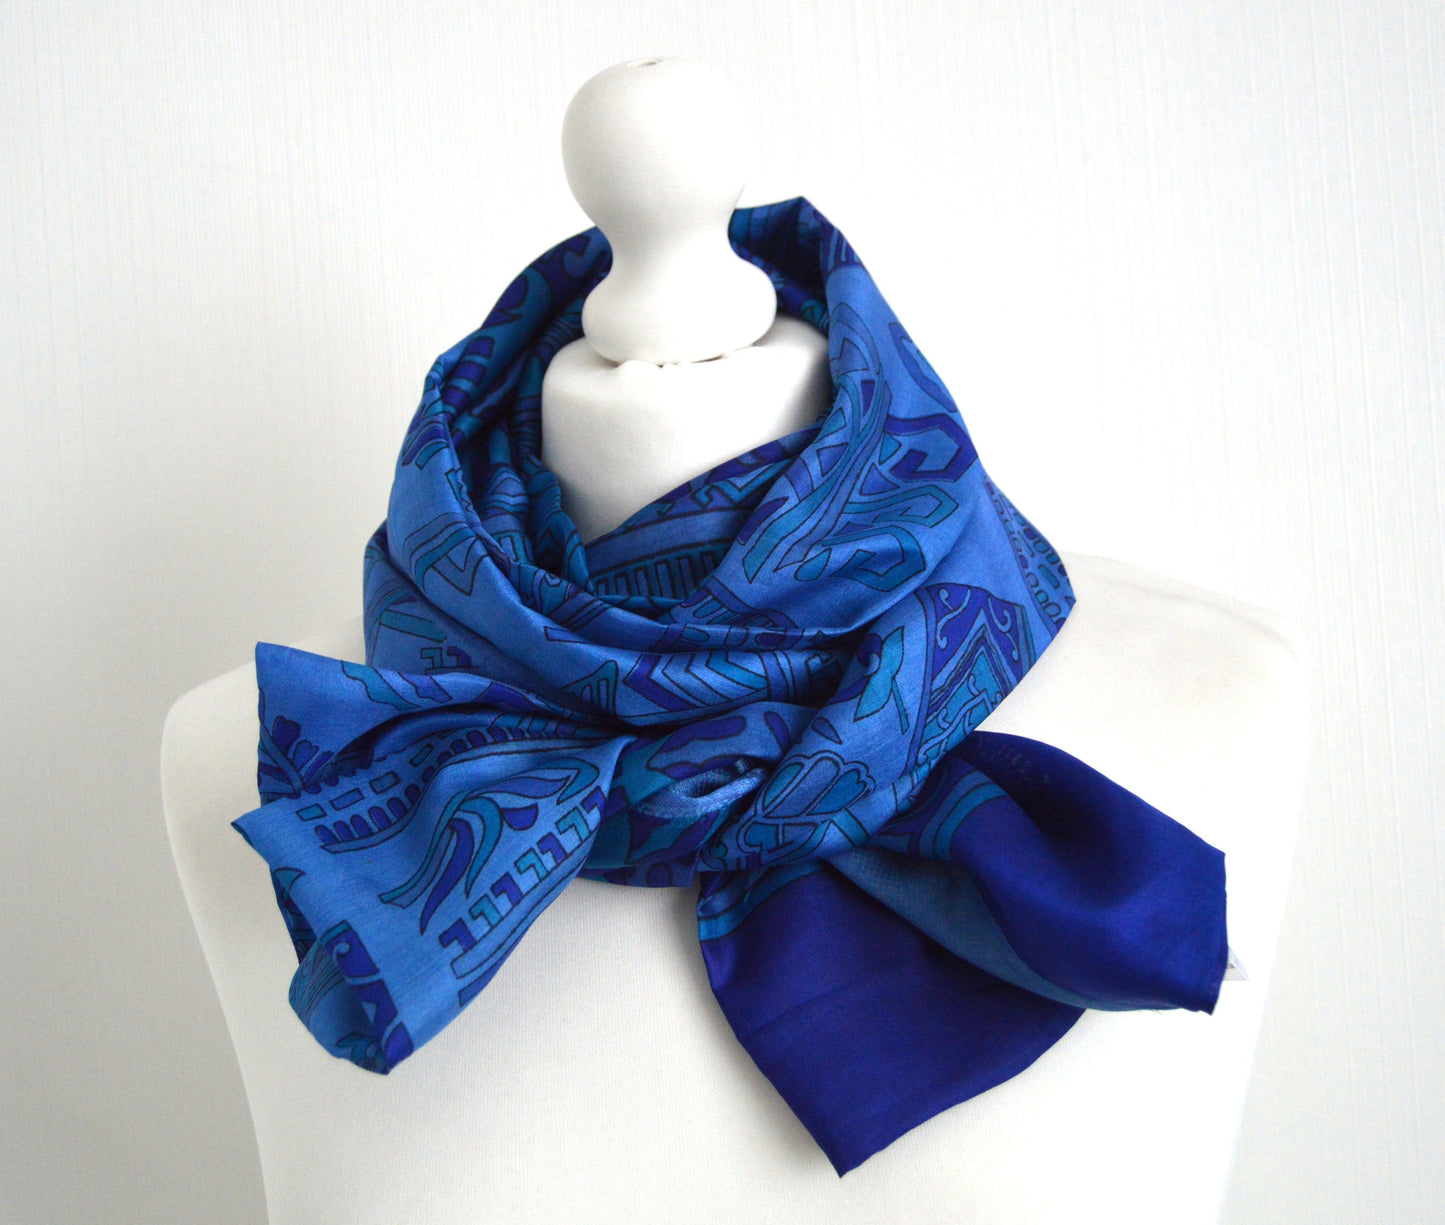 Marine Blue Sari Silk Scarf - Boho Spring Summer Trend Unisex Womens Scarf - Eco Friendly Upcycled Mothers Day Grandmother Dad Brother Gift